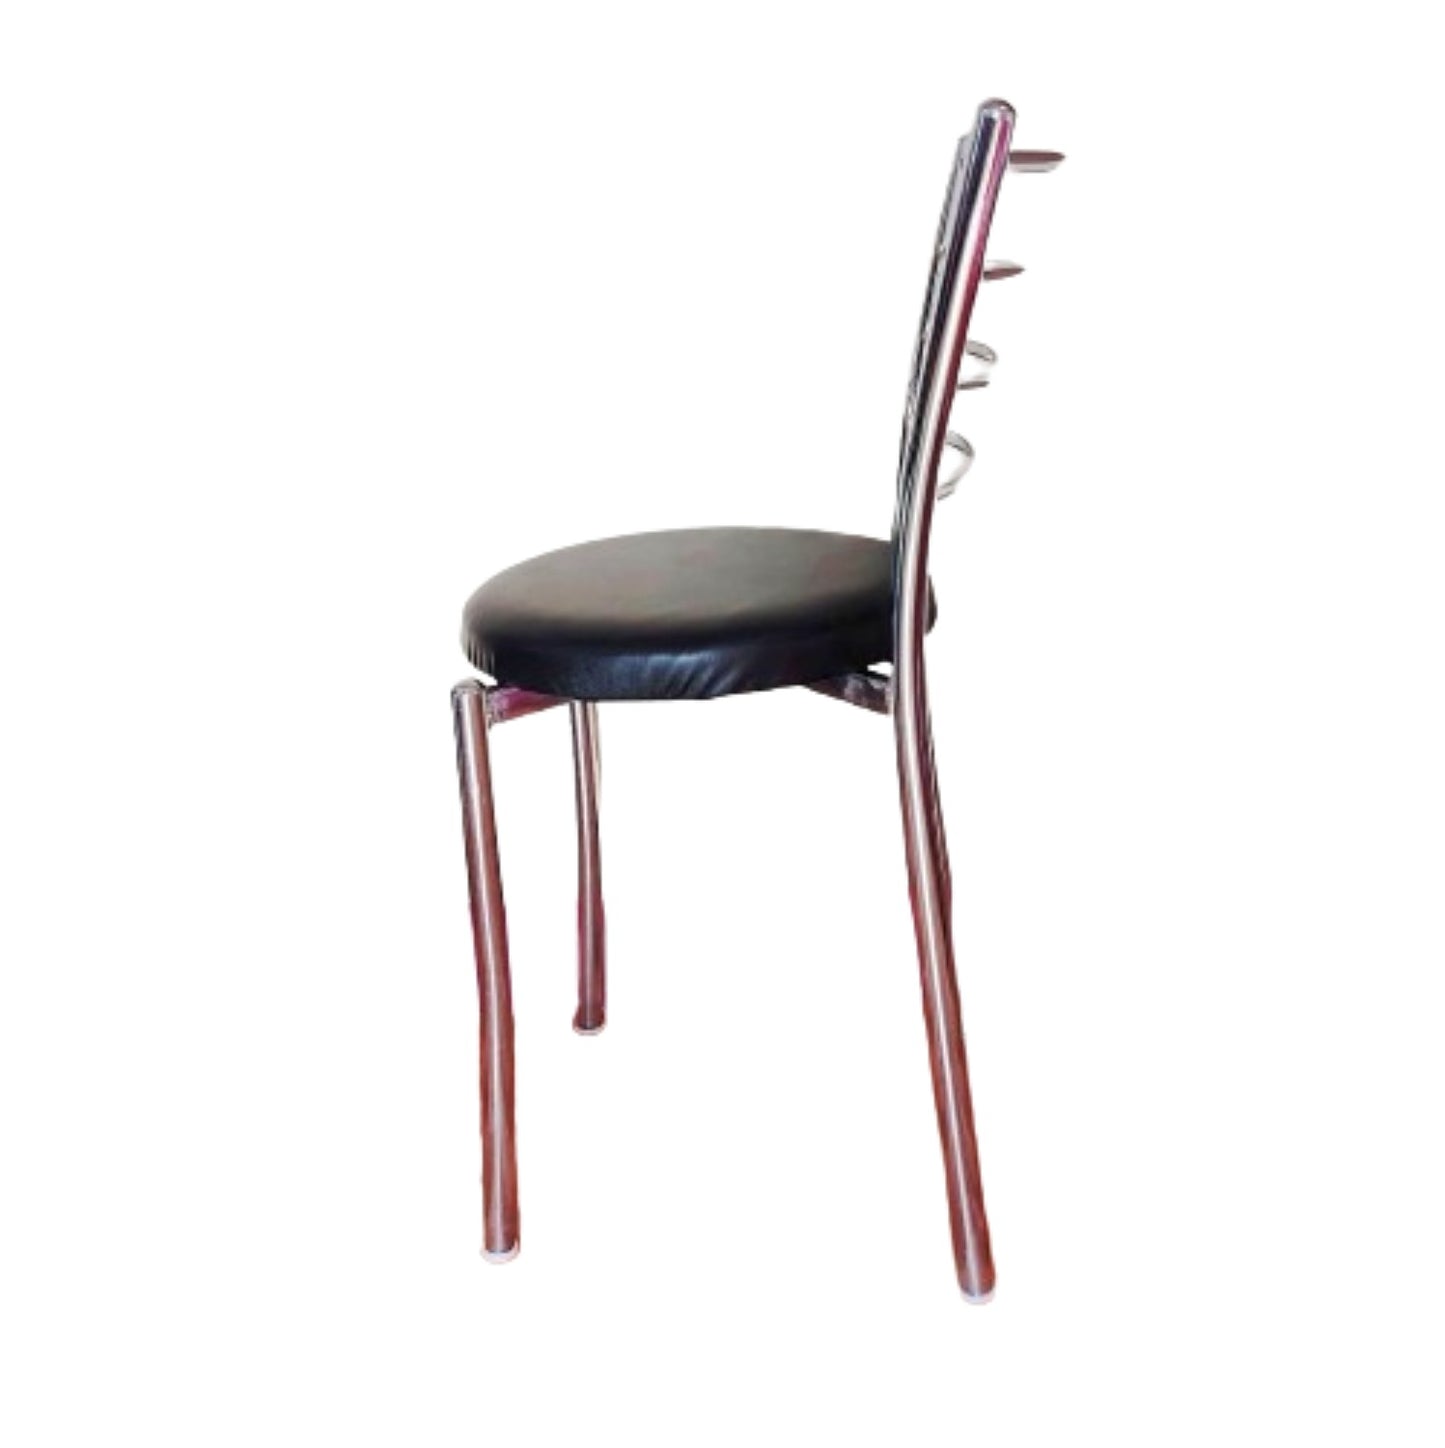 Bowzar Stainless Steel Chair with Cushion for Dining Restaurant